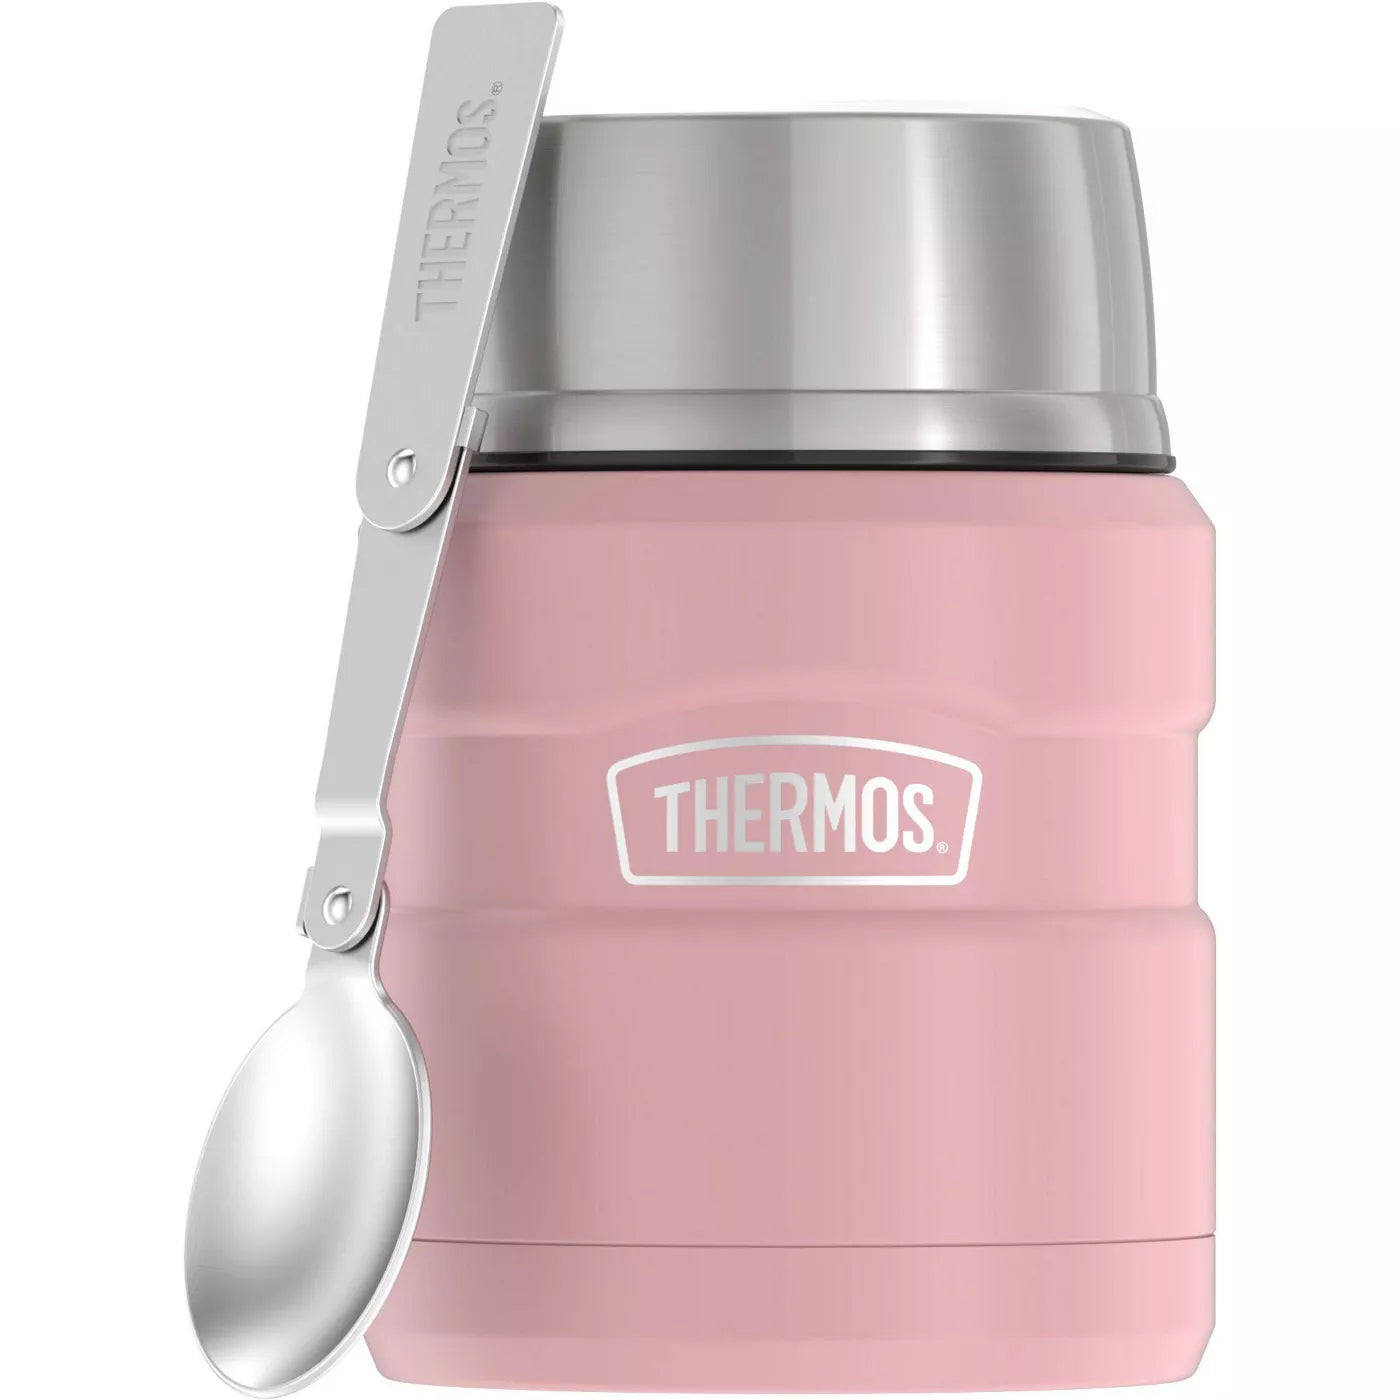 Thermos Stainless King Food Jar with Spoon - 16 Oz